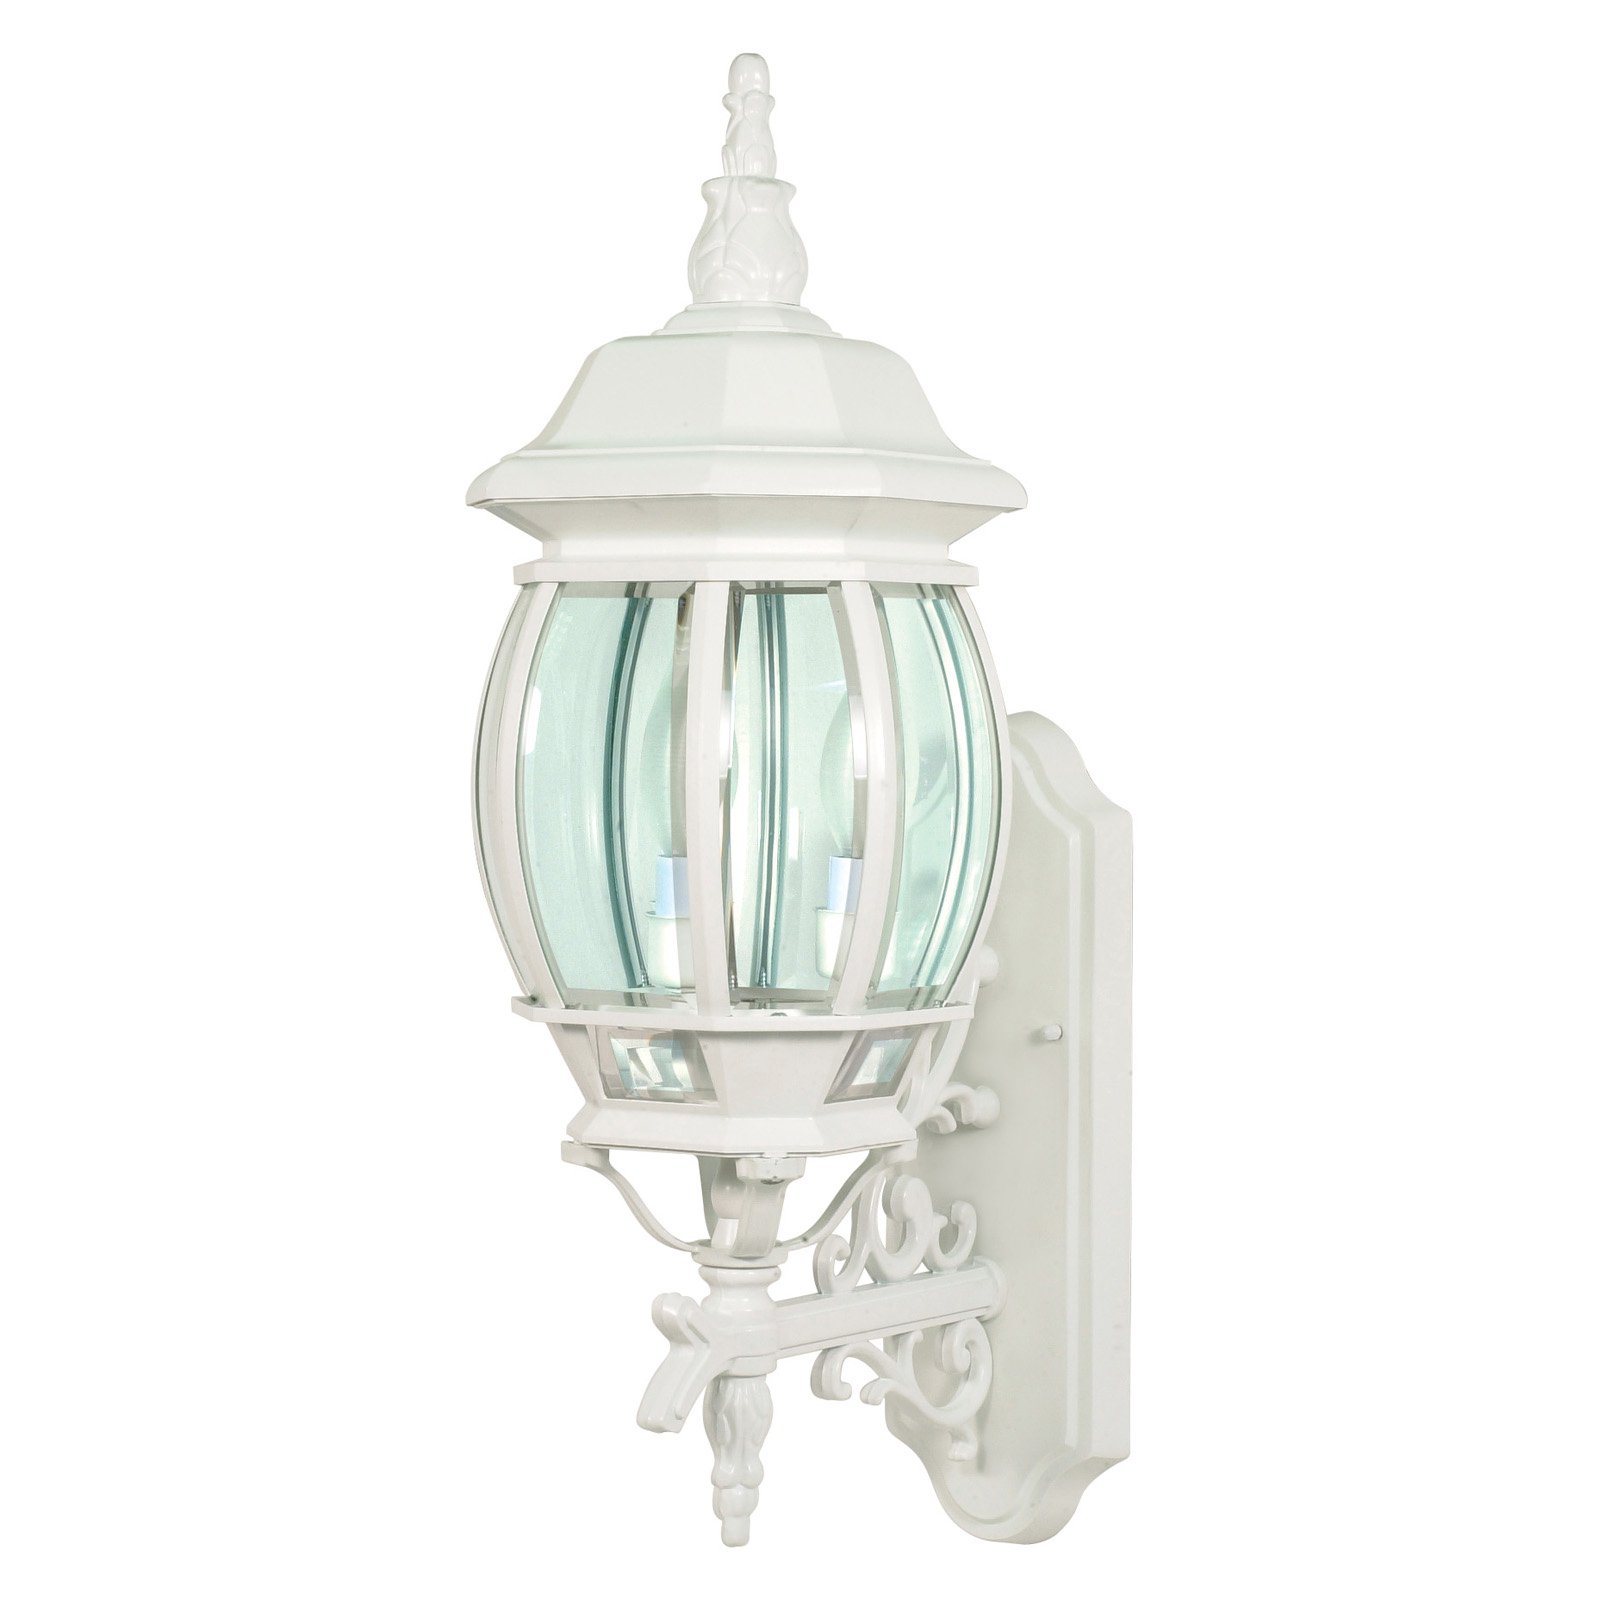 Nuvo Outdoor Wall Fixture,3L,22",White 60-888 - image 2 of 2